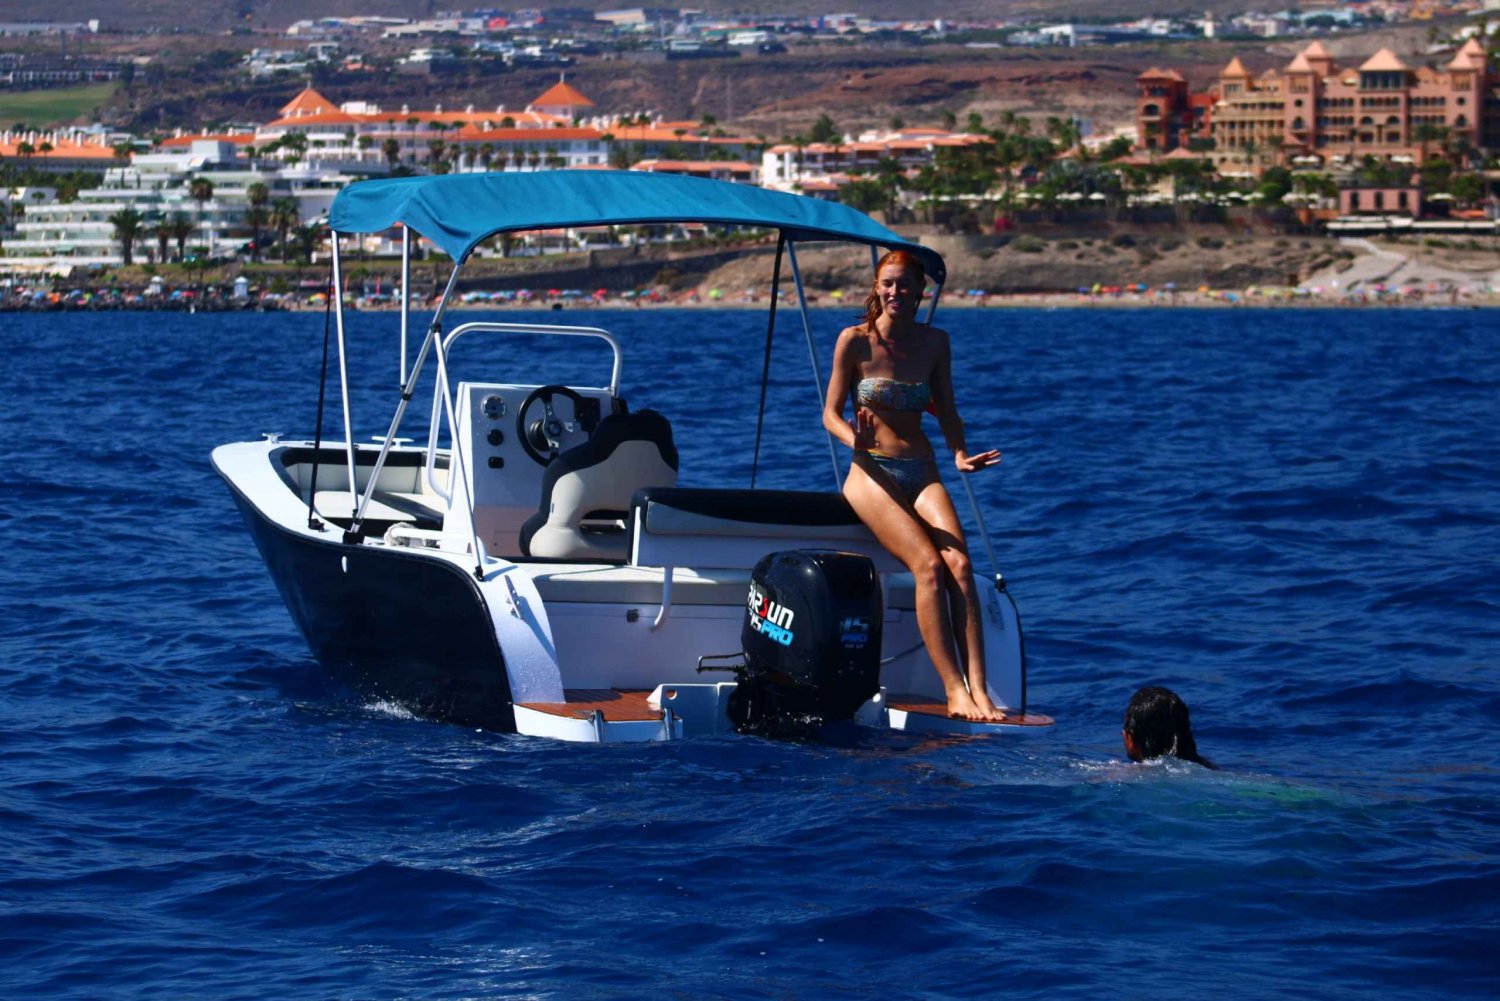 Tenerife: Rent a Boat with No License, Self Drive